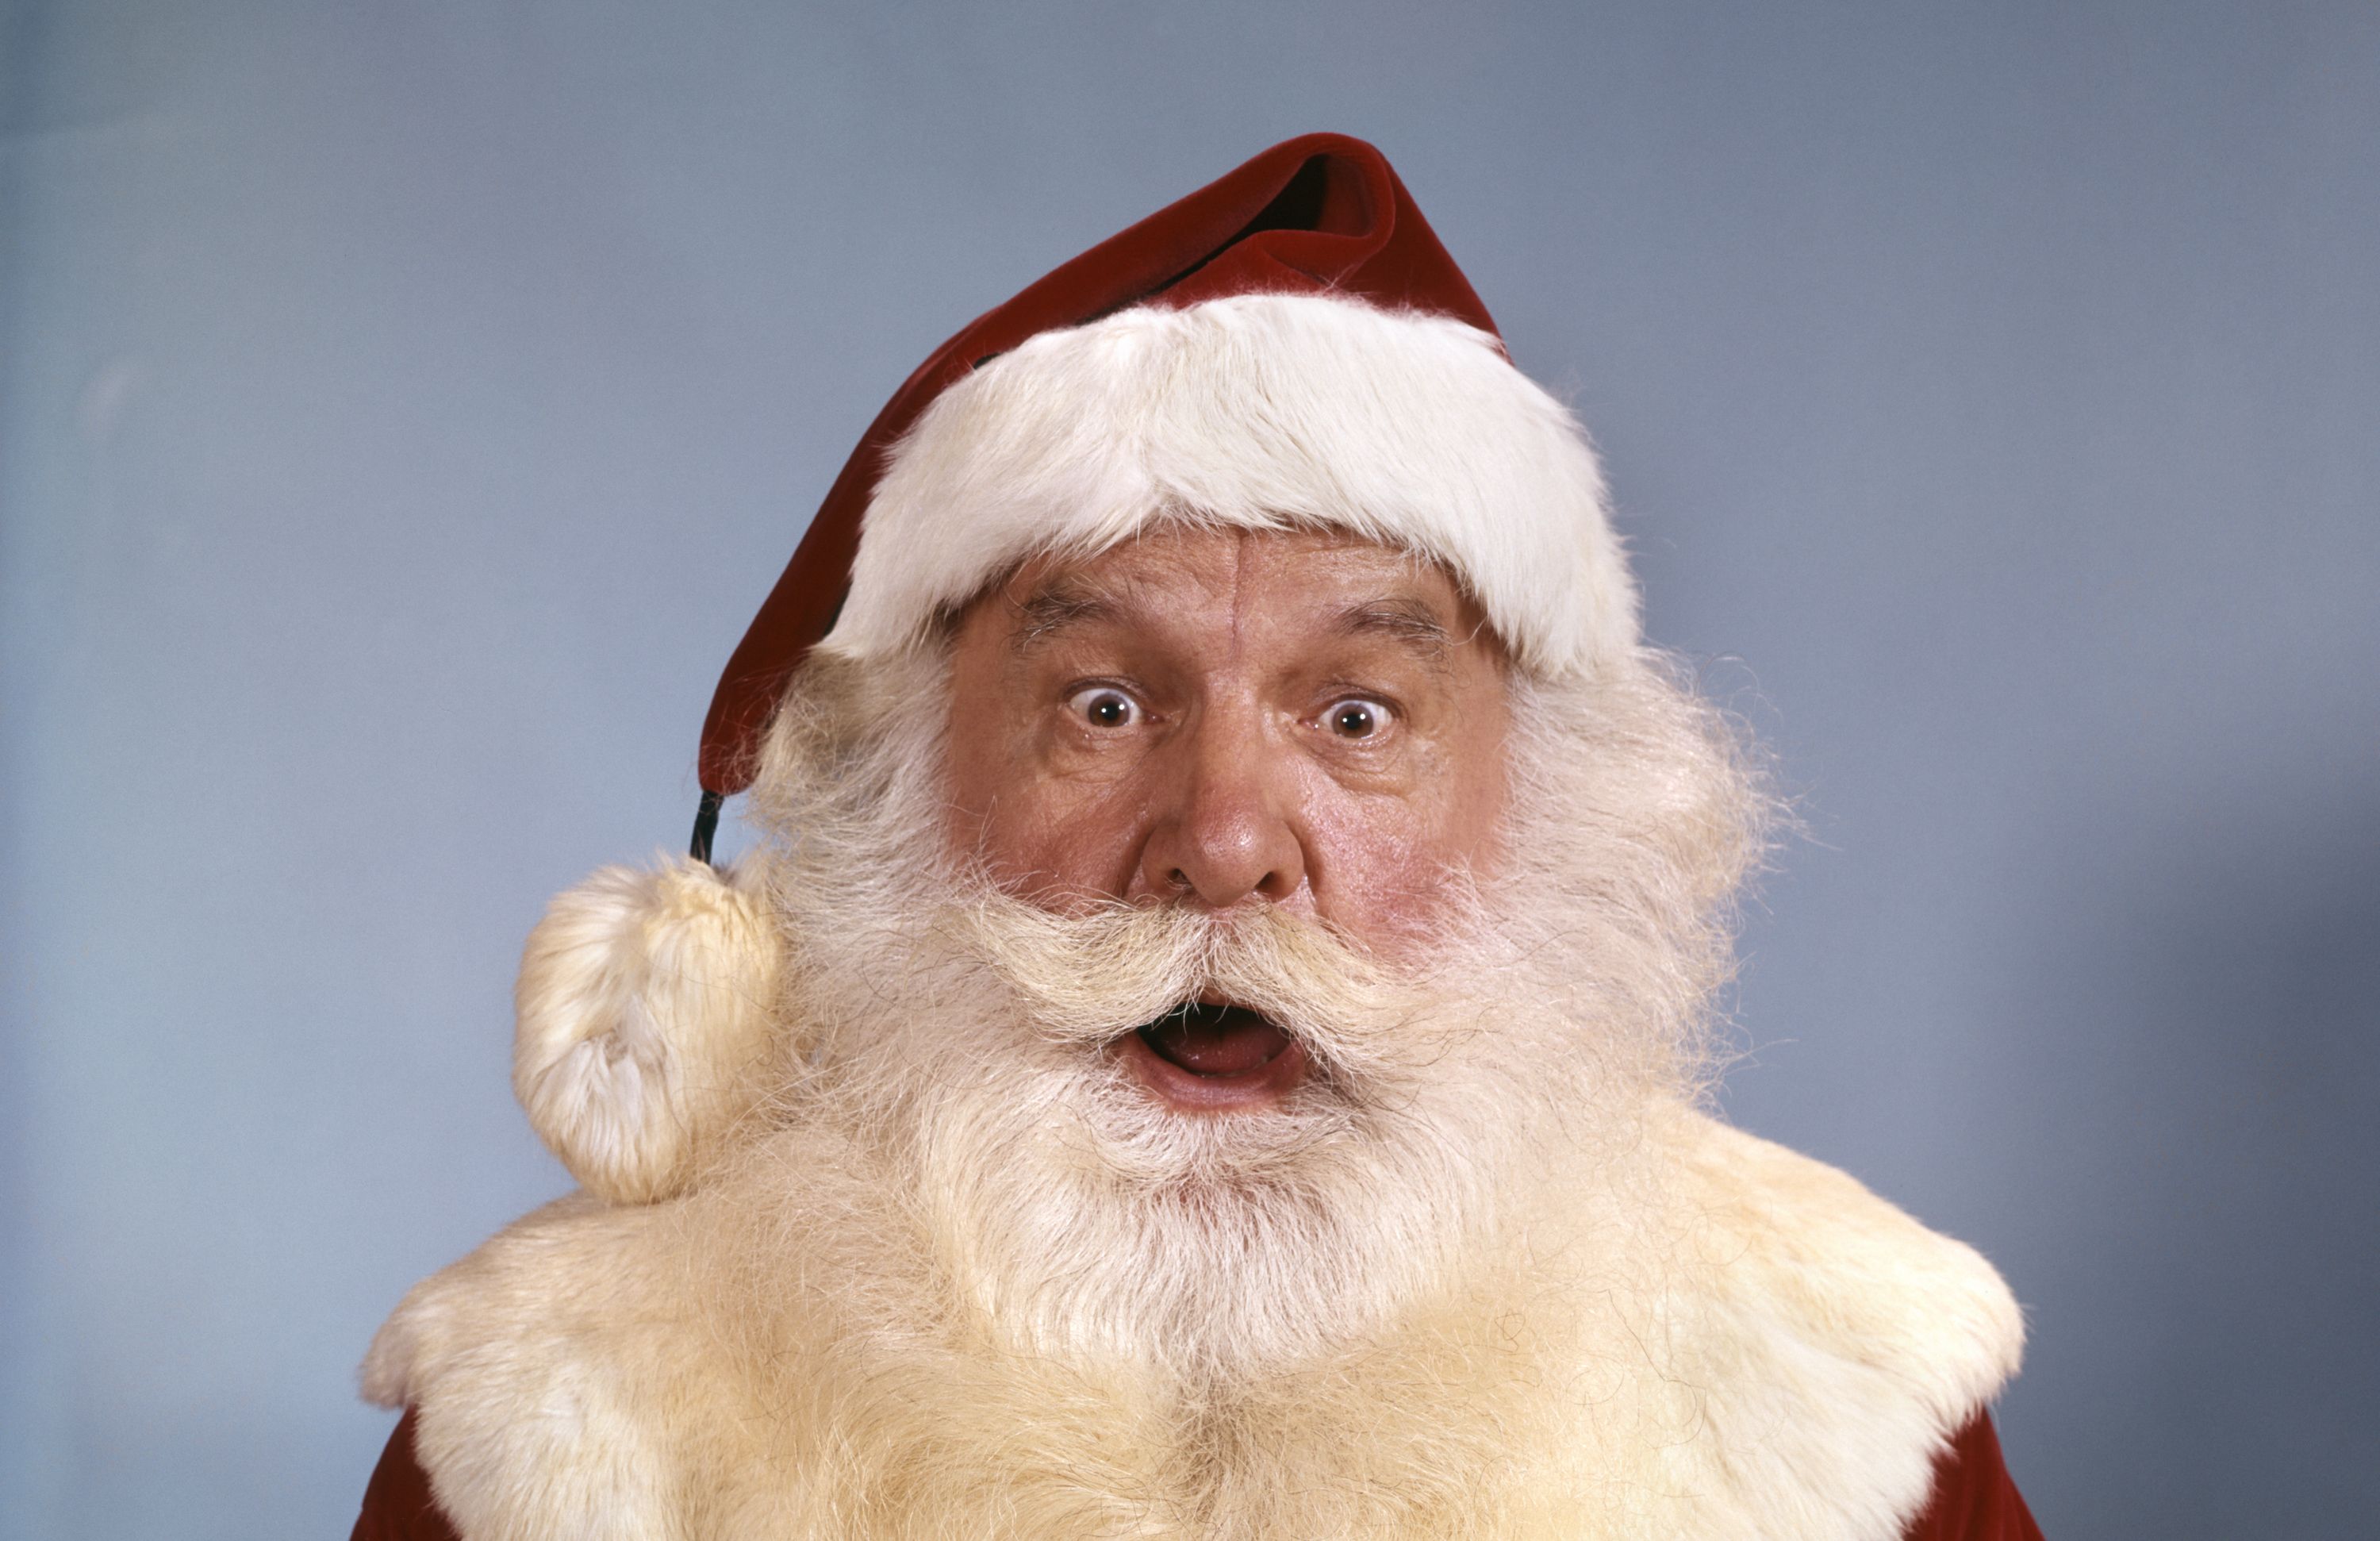 This Is What Santa Claus Actually Looked Like According To Science